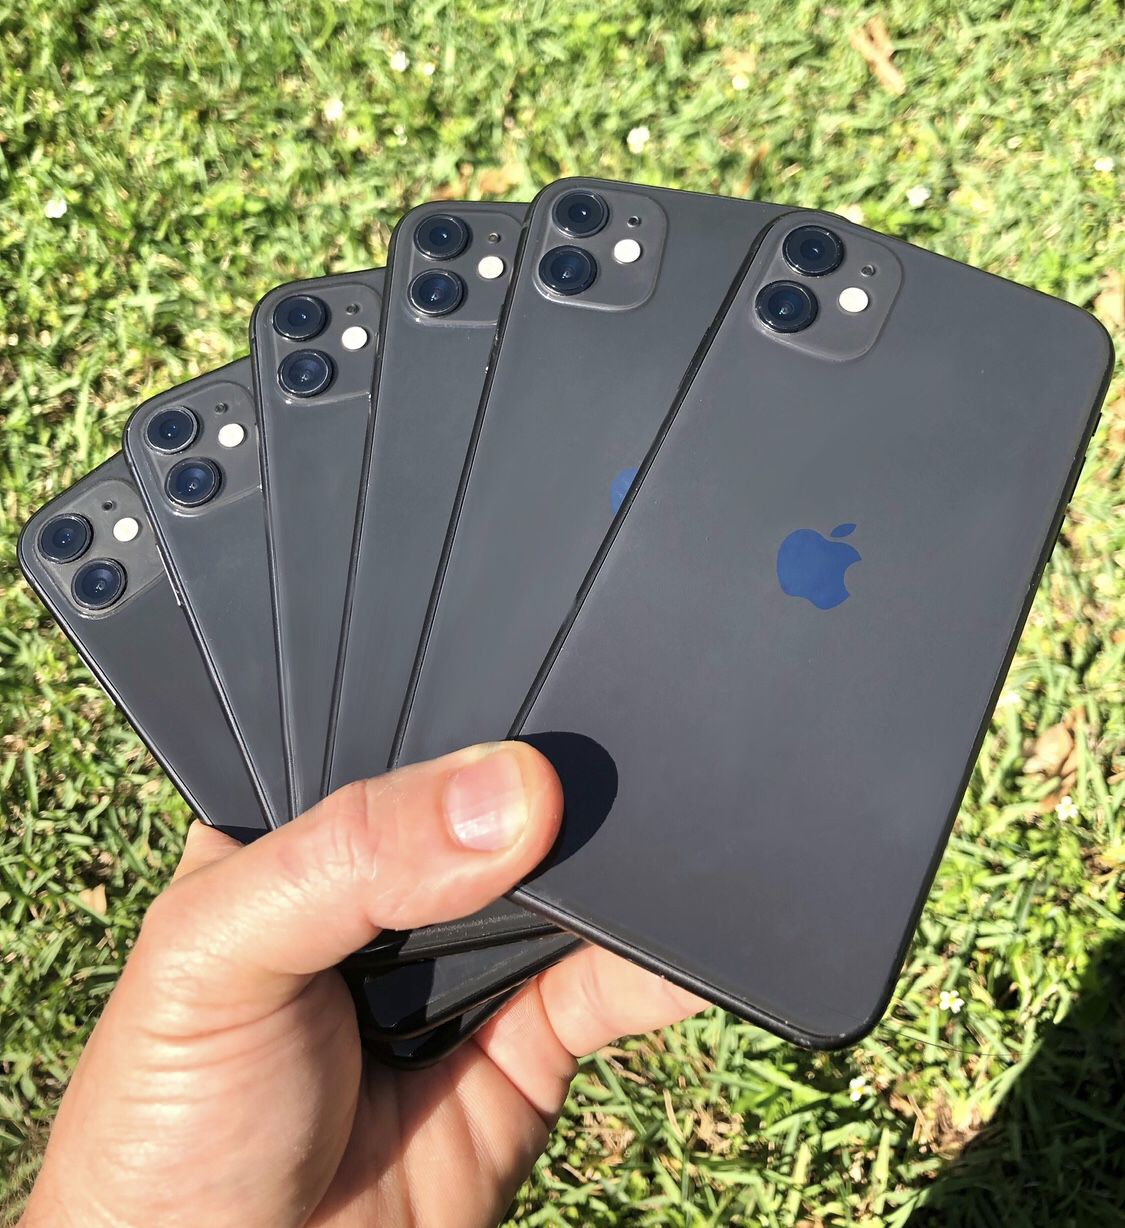 FIRM PRICE -  iPhone 11 64gb Space Gray Factory Unlocked - VERY GOOD CONDITION - 5 Available